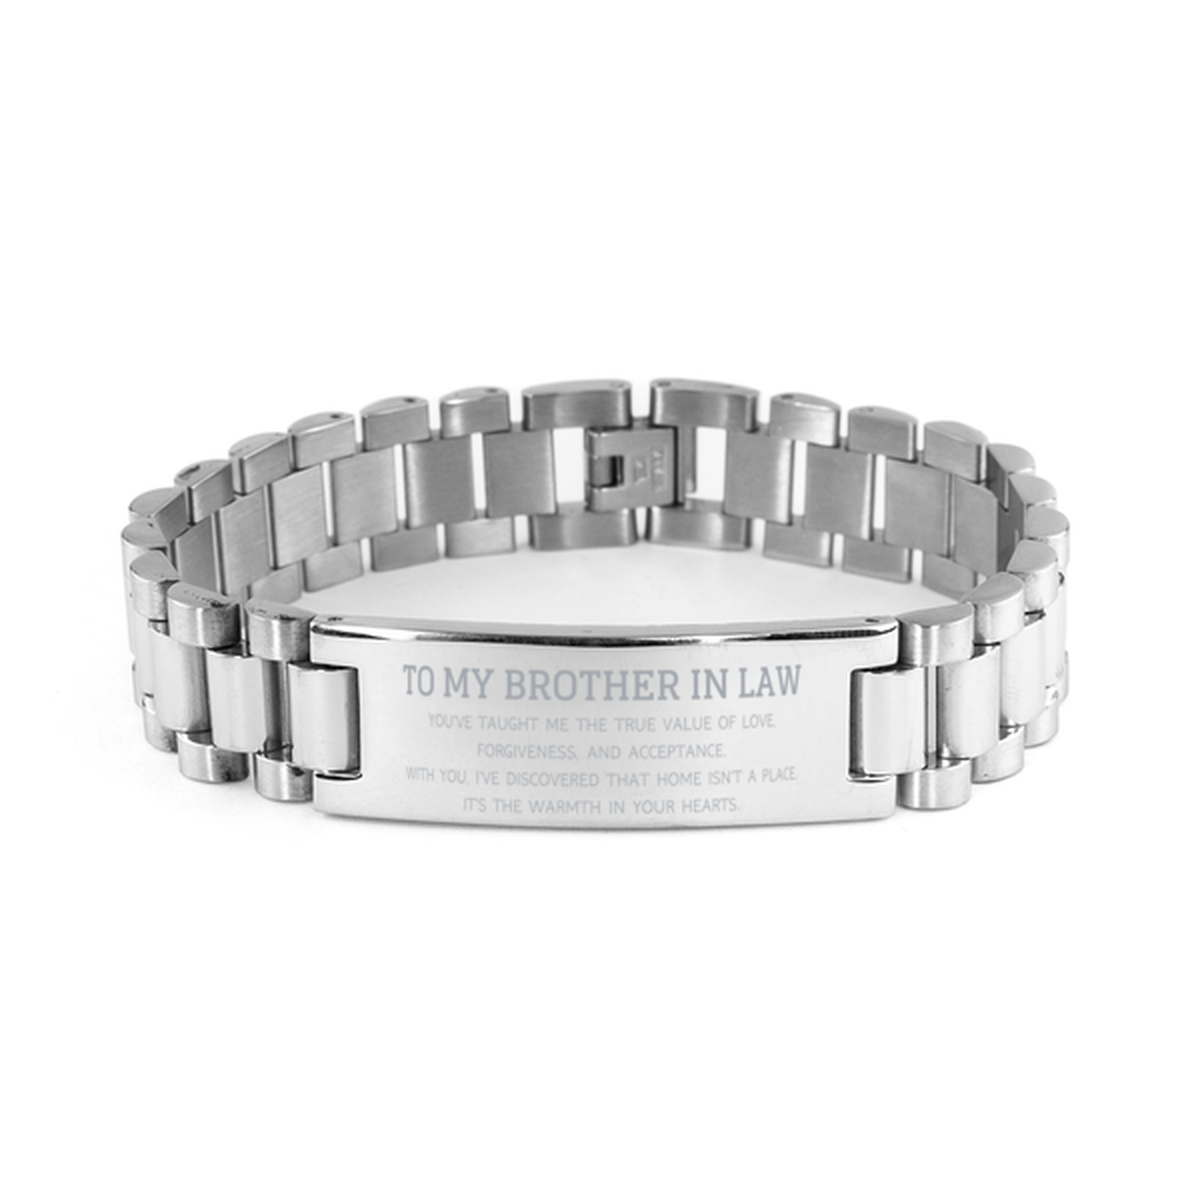 To My Brother In Law Gifts, You've taught me the true value of love, Thank You Gifts For Brother In Law, Birthday Ladder Stainless Steel Bracelet For Brother In Law